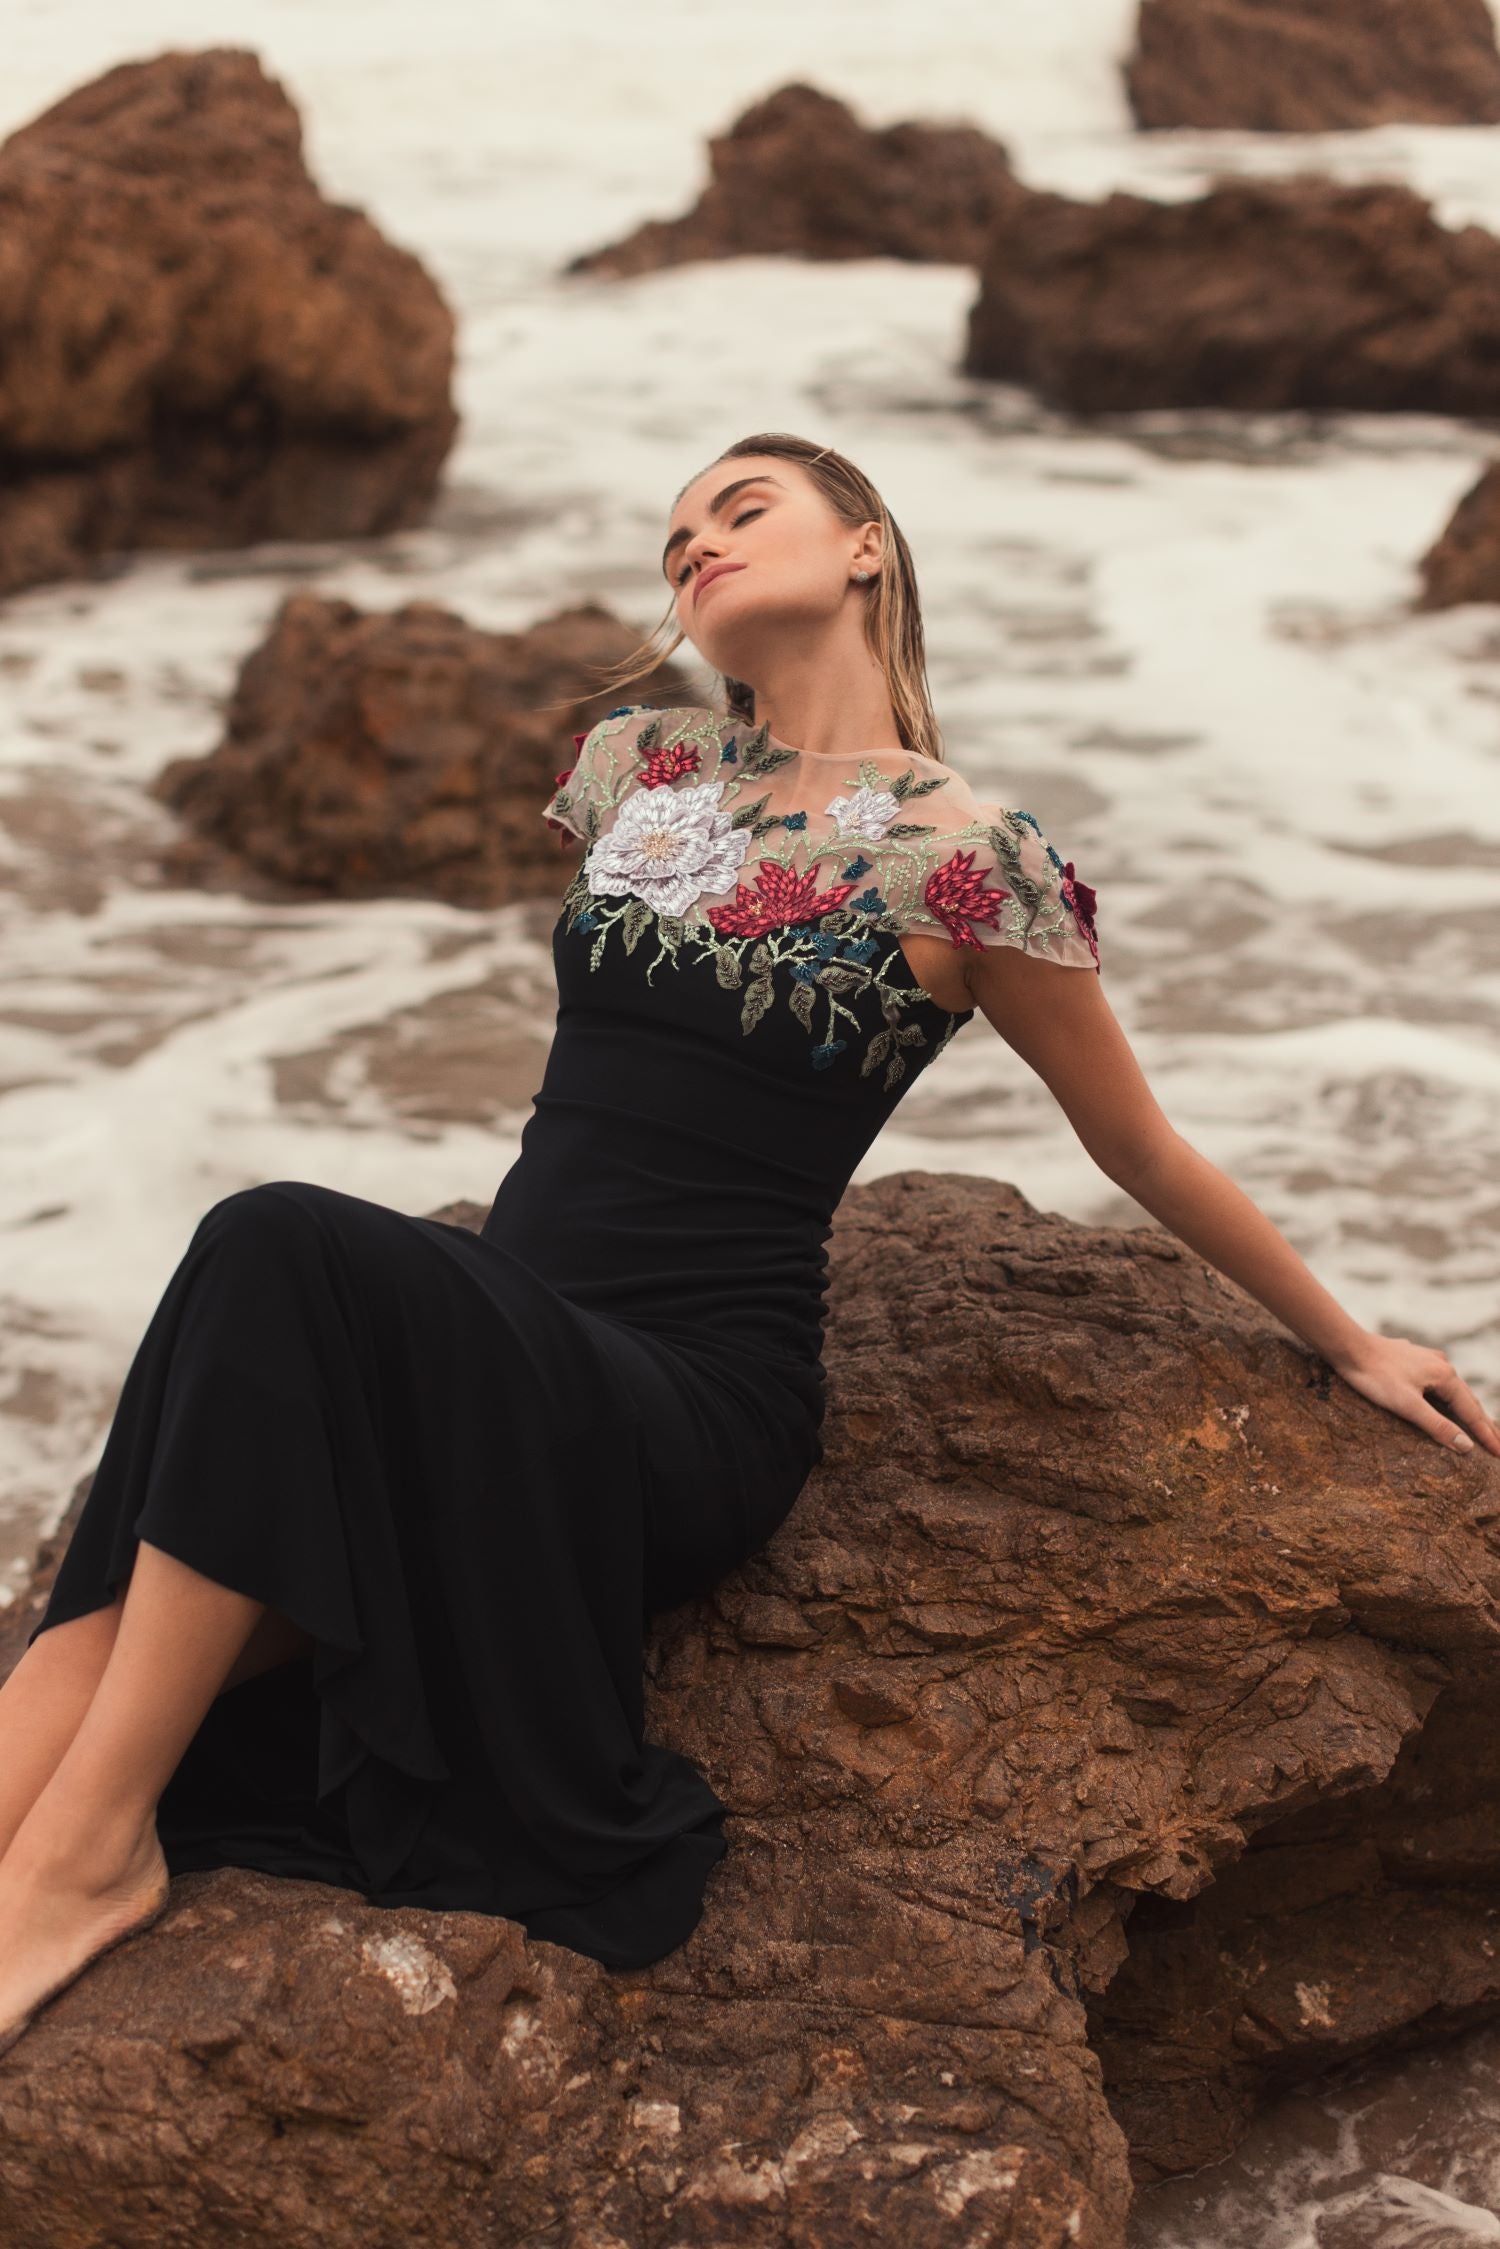 Floral Embellished Jersey Fitted Gown